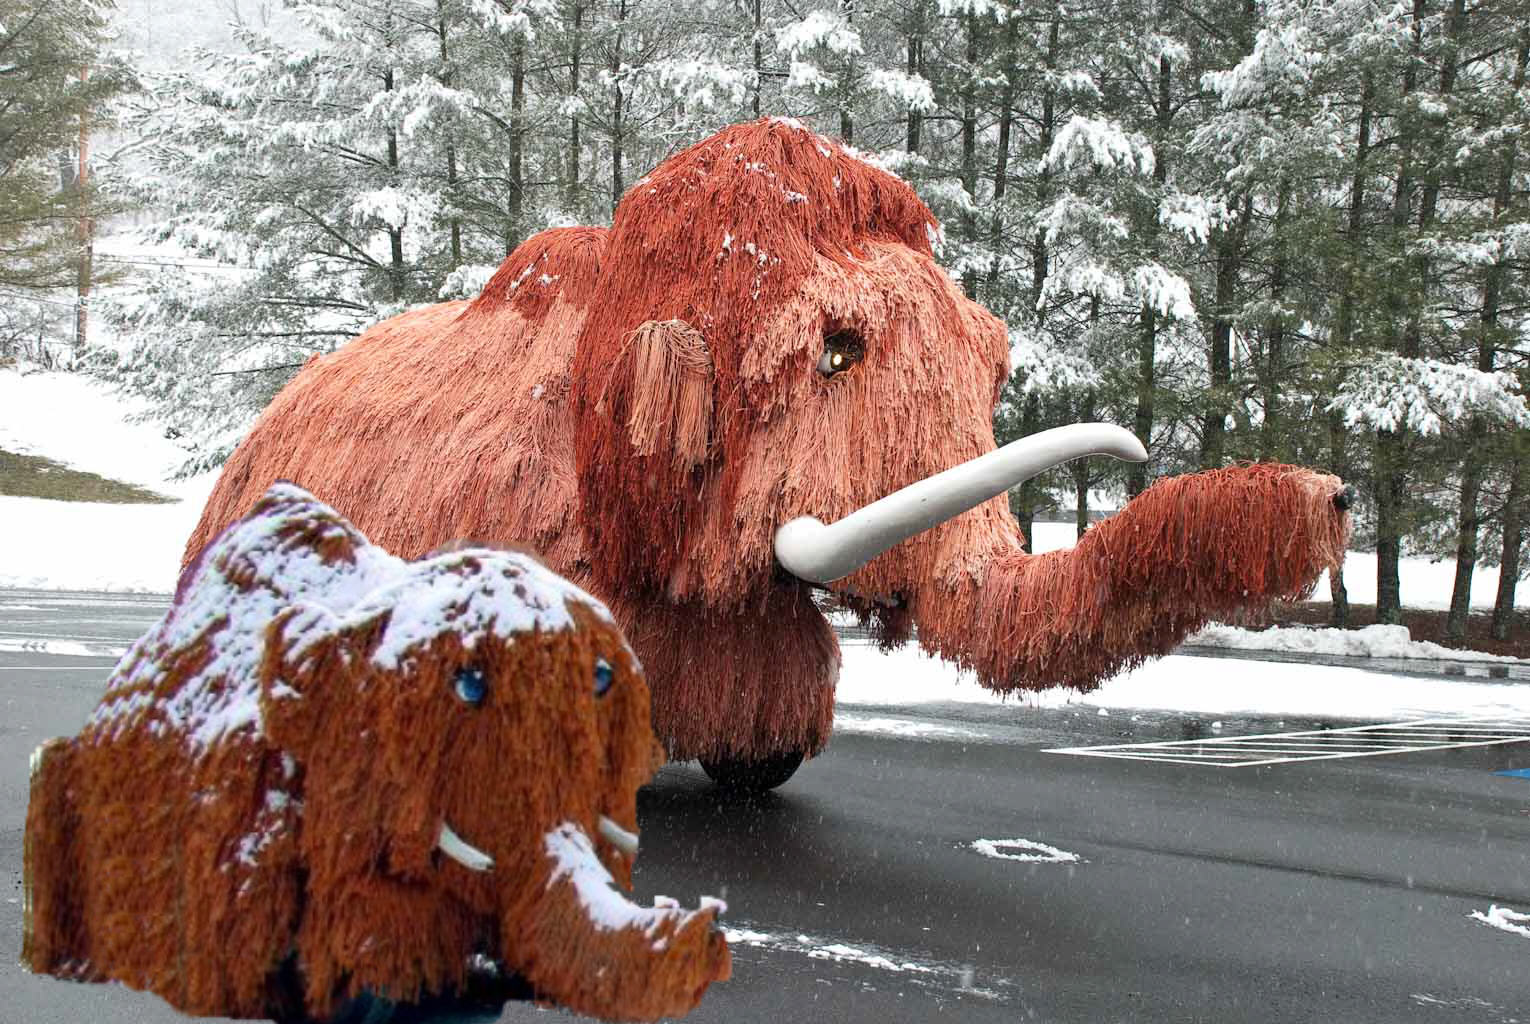 Wooly and Salty in the snow - Museum of the Middle Appalachians - Saltville, VA